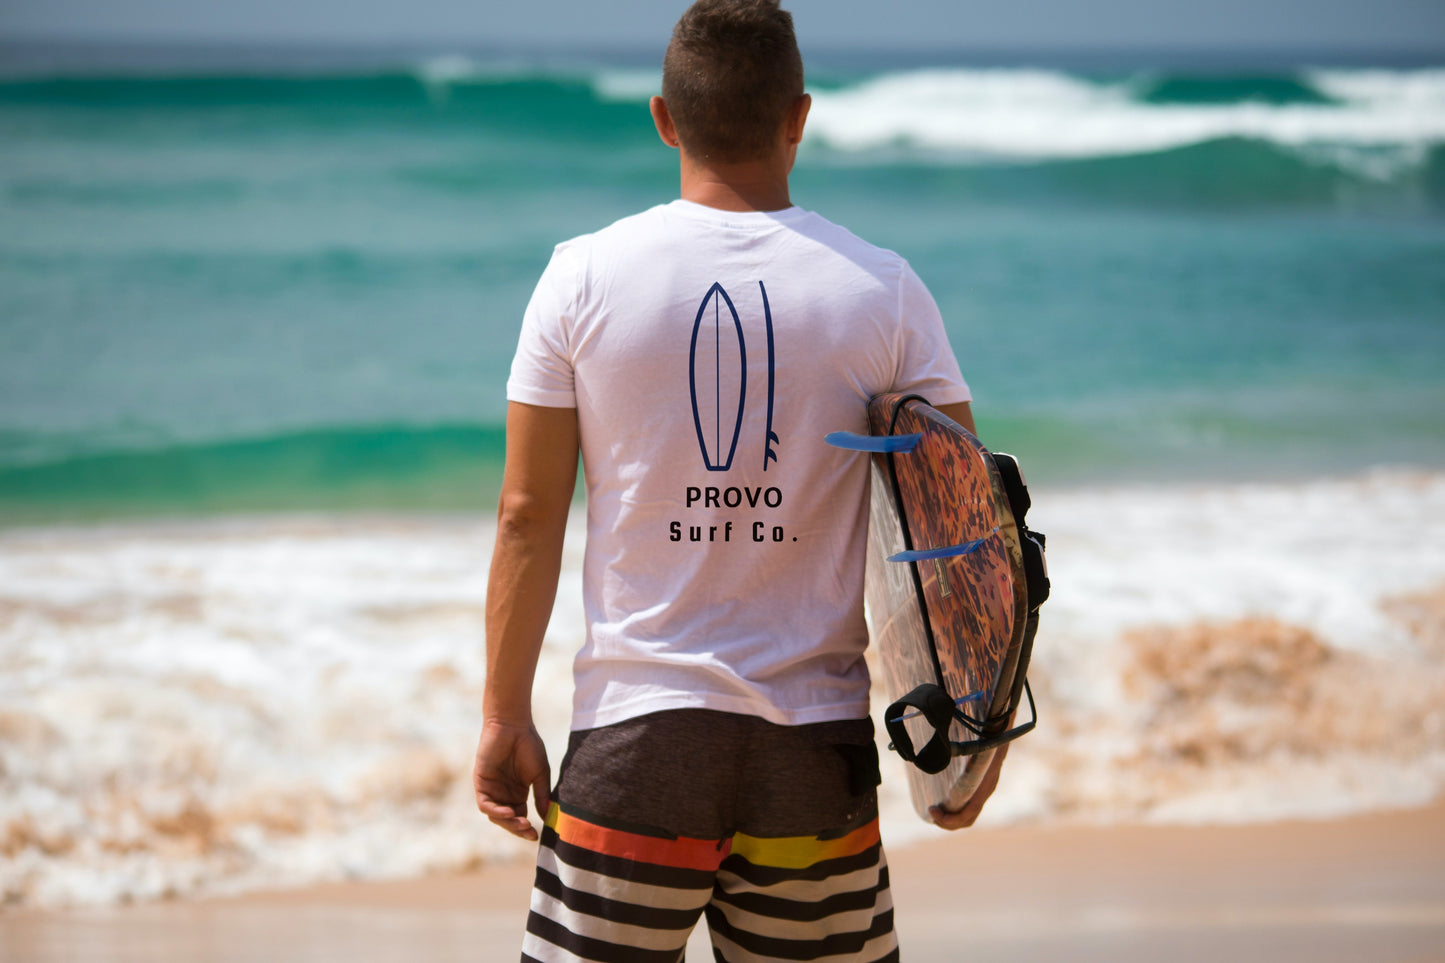 Provo Surf Co. White Surfboard Shirt